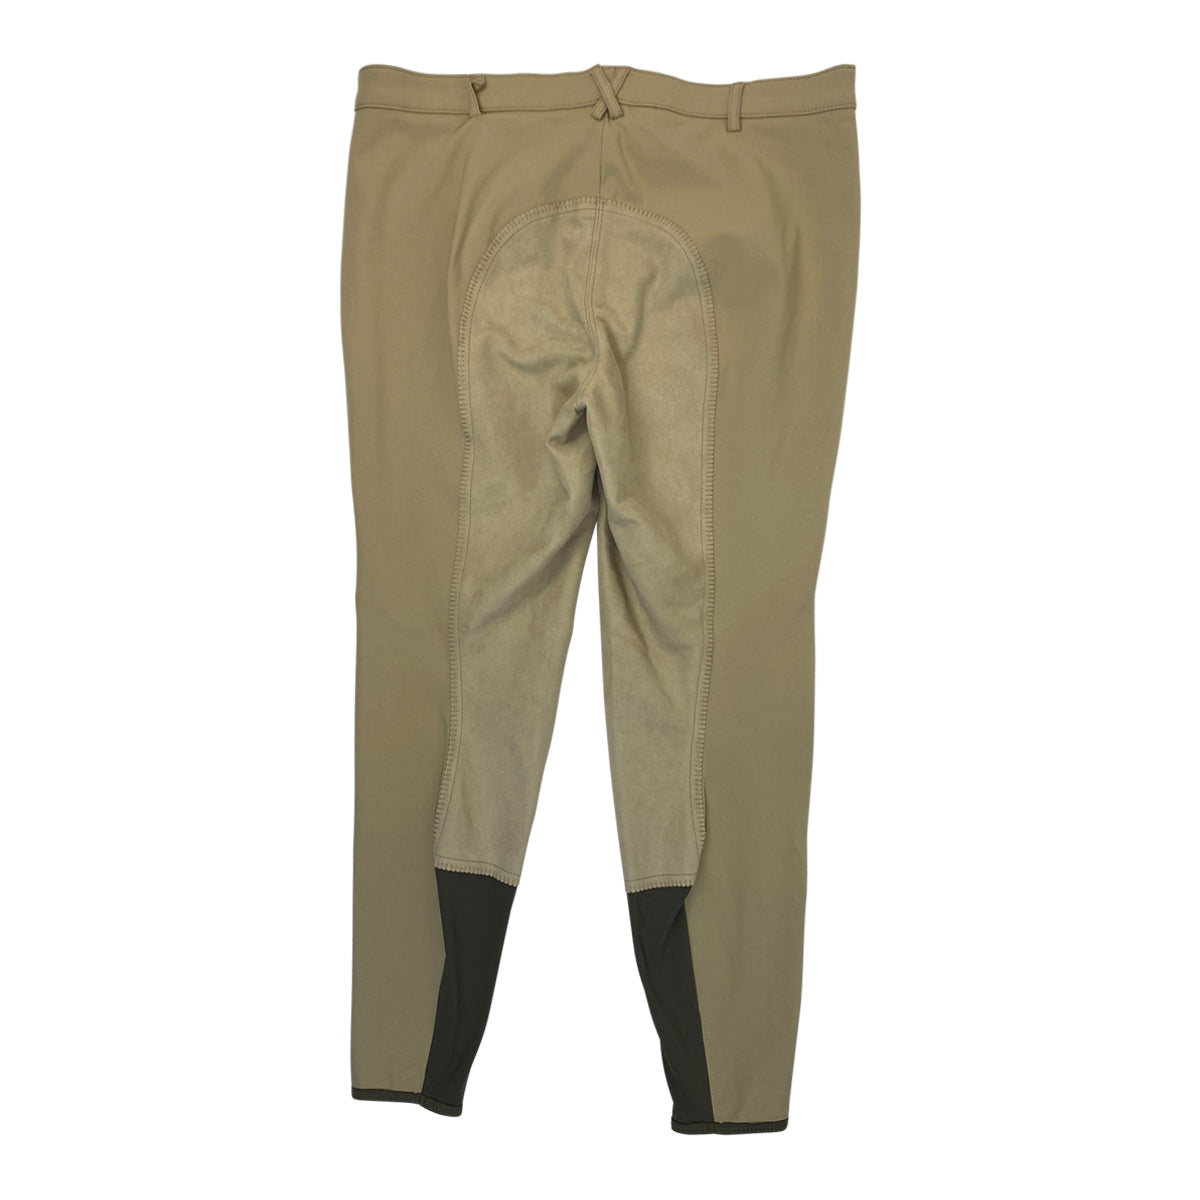 Pikeur 'Lugana Stretch' Full Seat Breeches in Sand